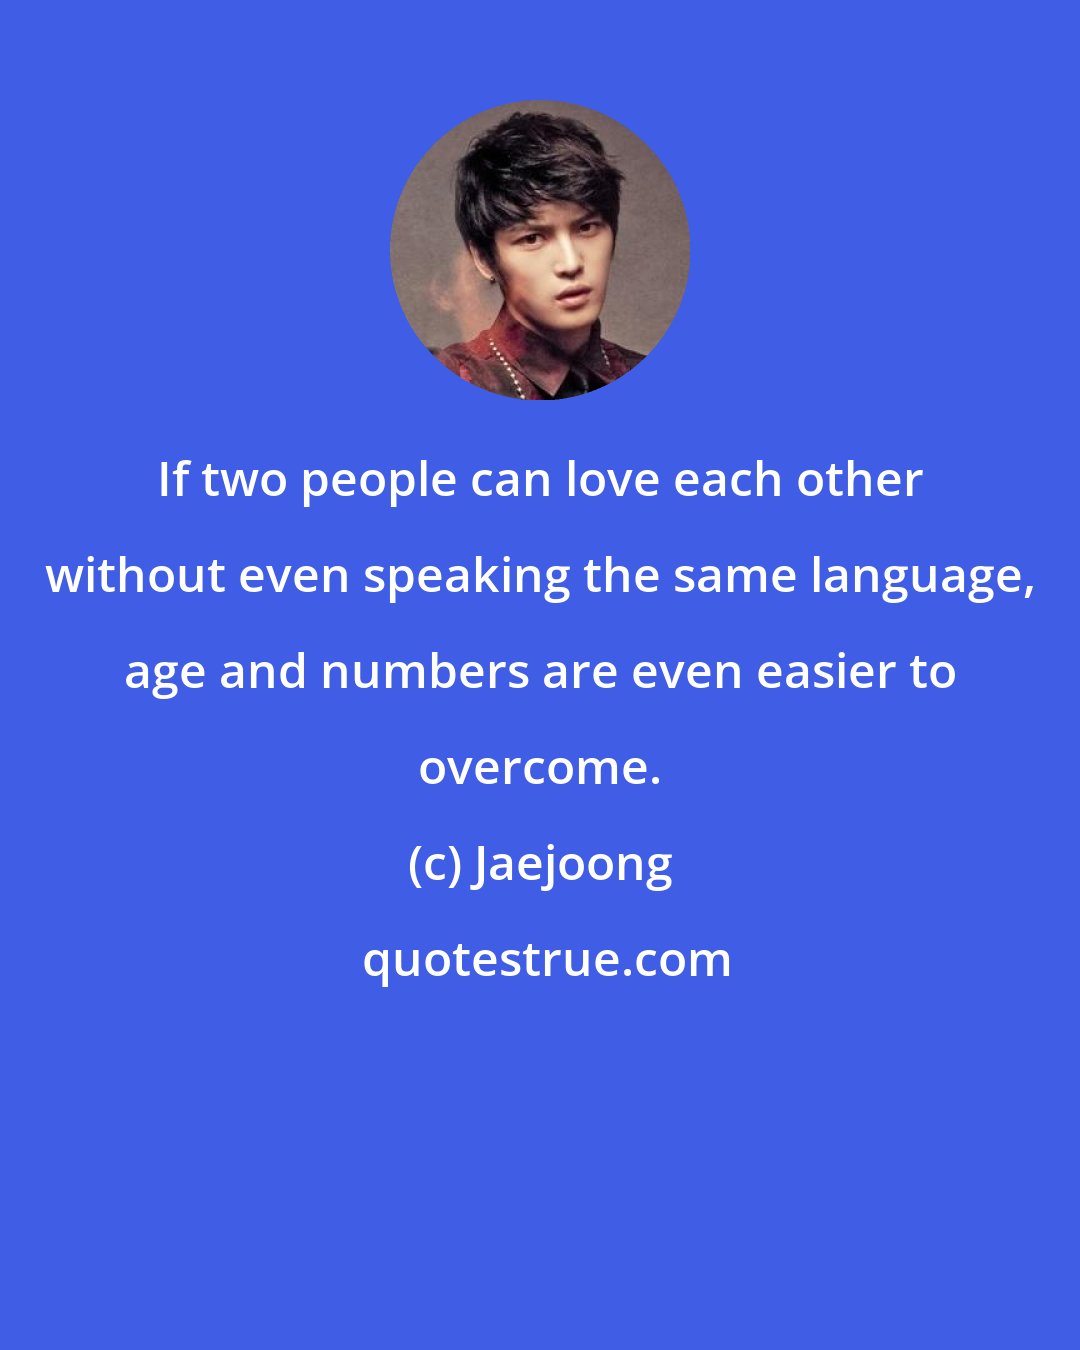 Jaejoong: If two people can love each other without even speaking the same language, age and numbers are even easier to overcome.